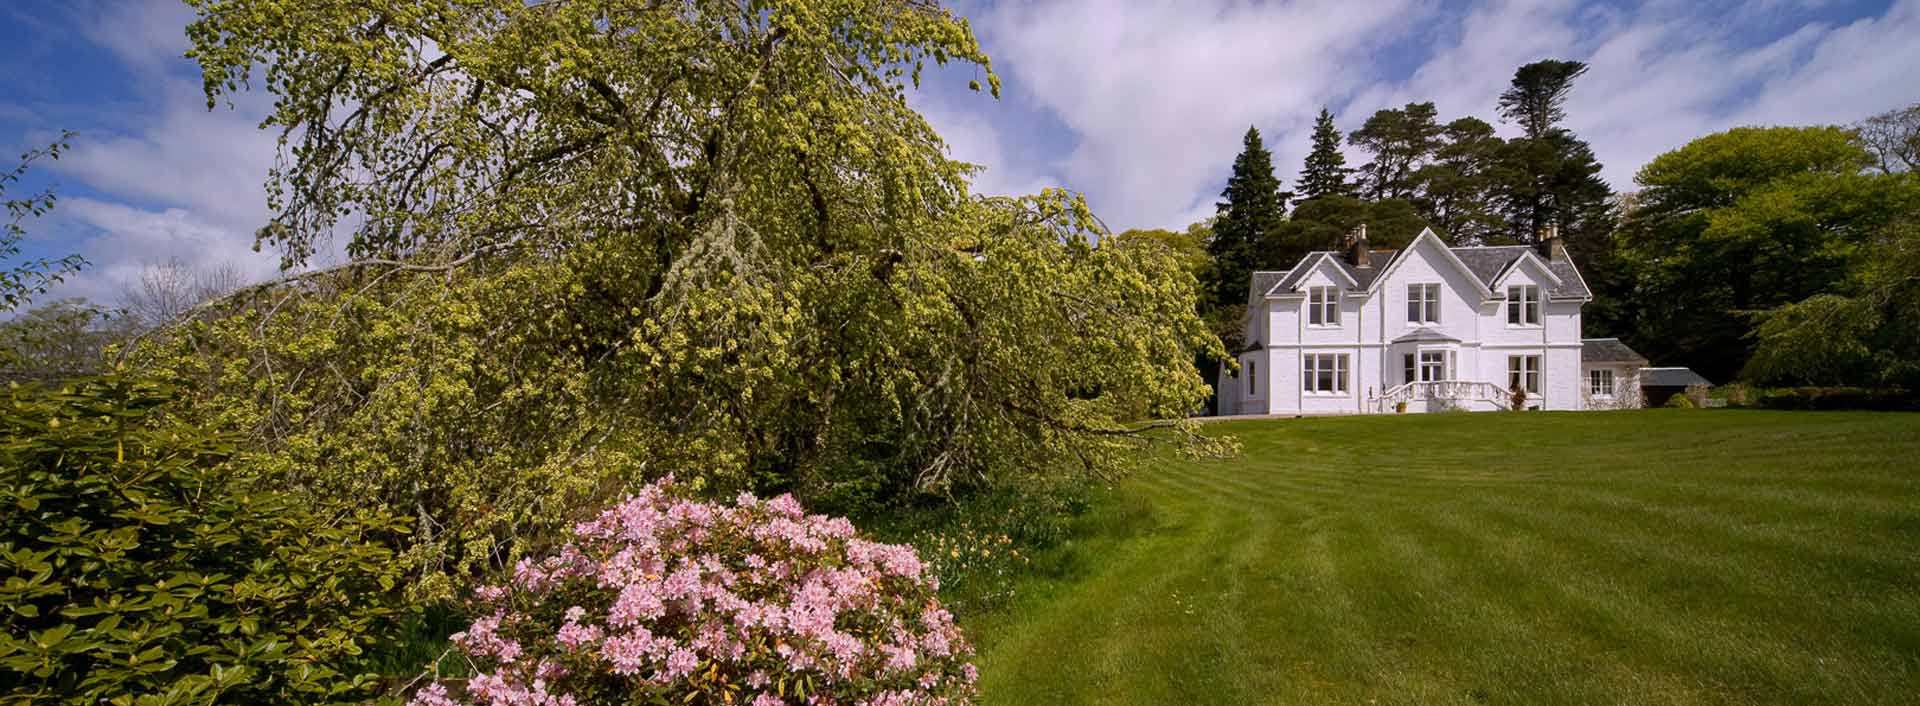 Druimneil House - country house bed and breakfast in Port Appin near Oban on the Argyll coast of Scotland